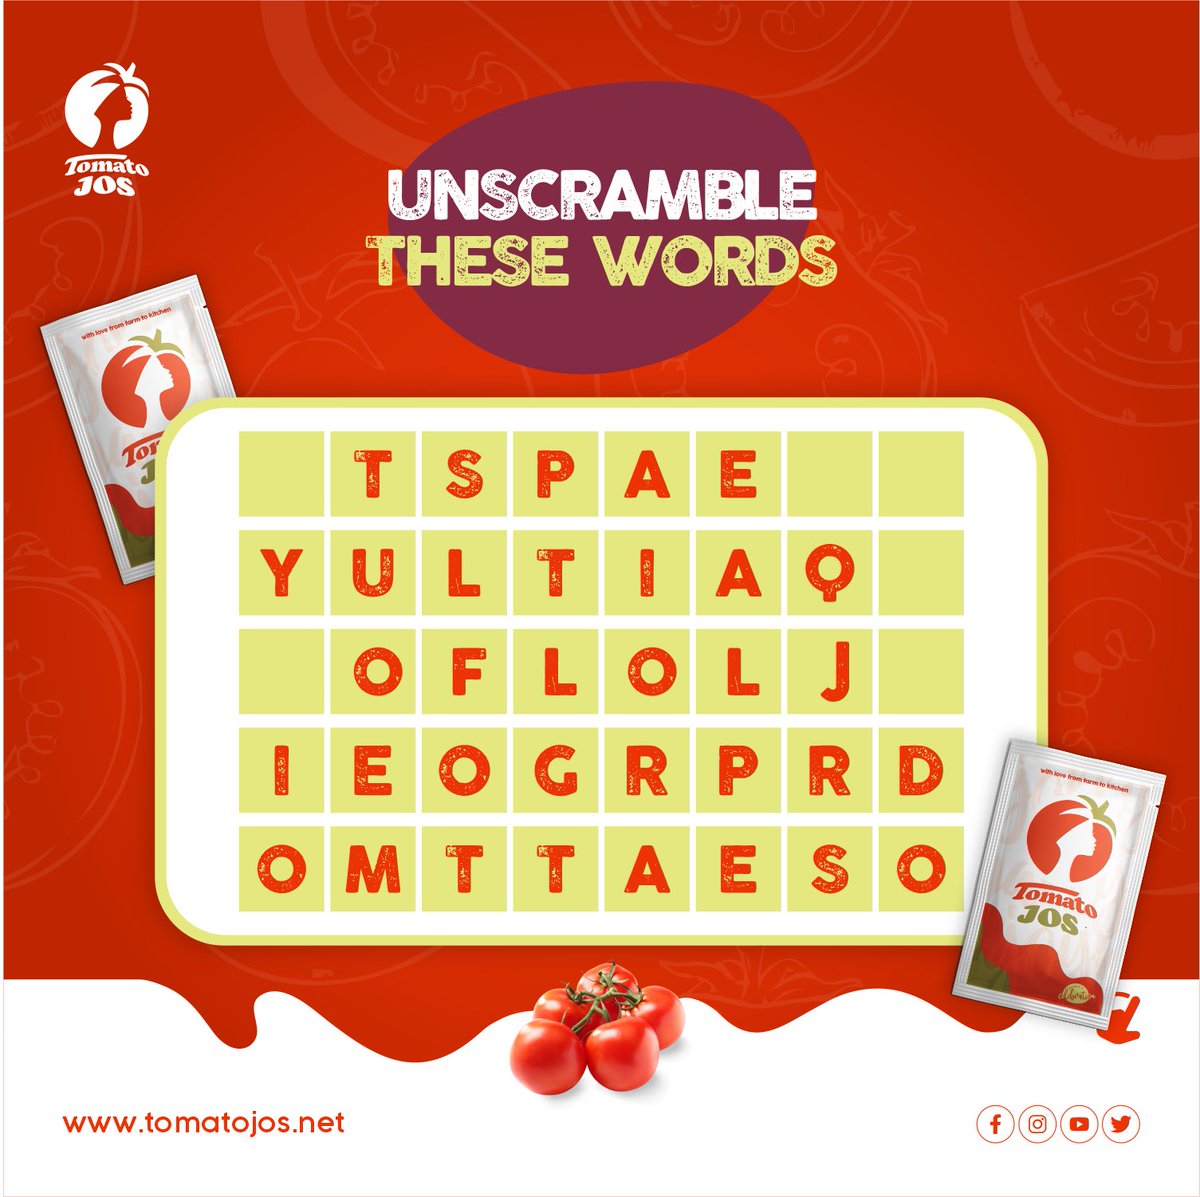 Who's ready? Let's go. Unscramble these words as fast as you can. Tag your friends to try as well. #trivia #unscramble #tomatojos